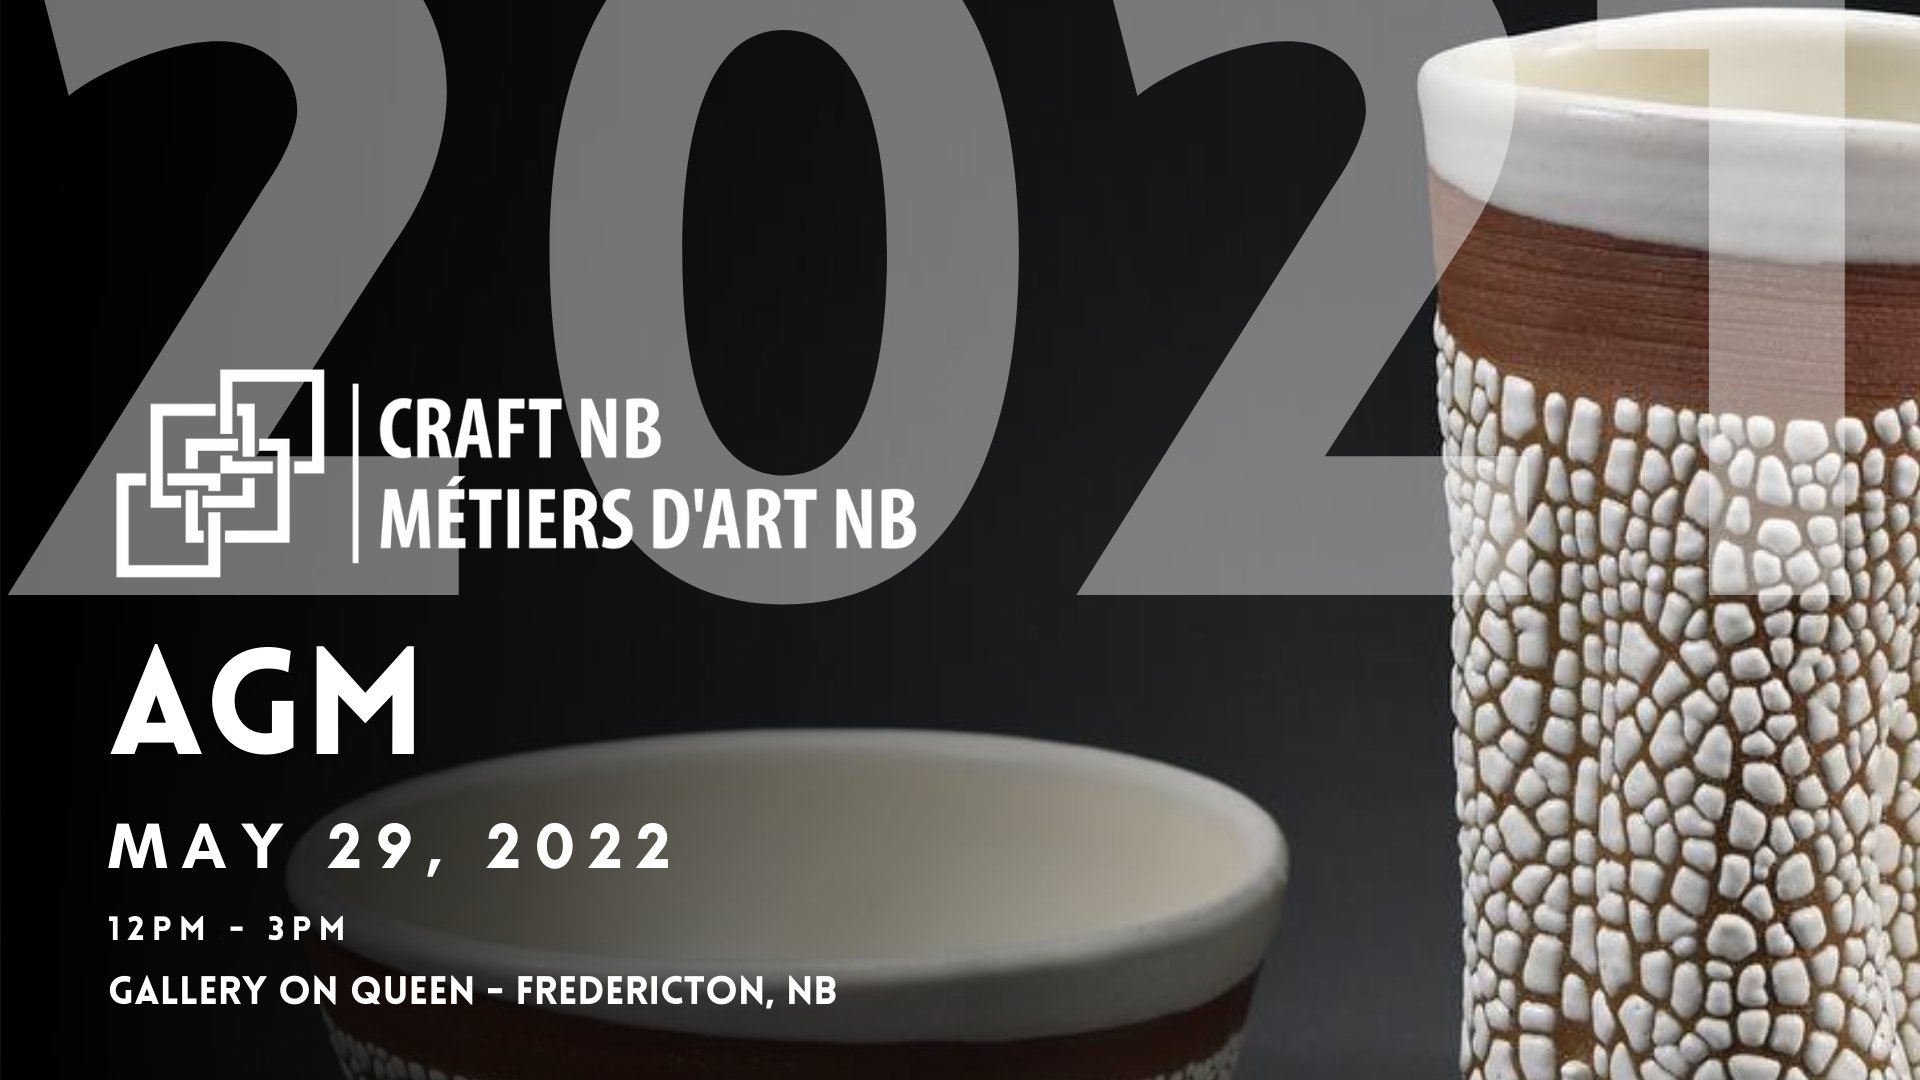 Craft NB, Métiers D'Art NB. AGM May 29, 2022, 12pm - 3pm. Gallery on Queen, Fredericton, NB.